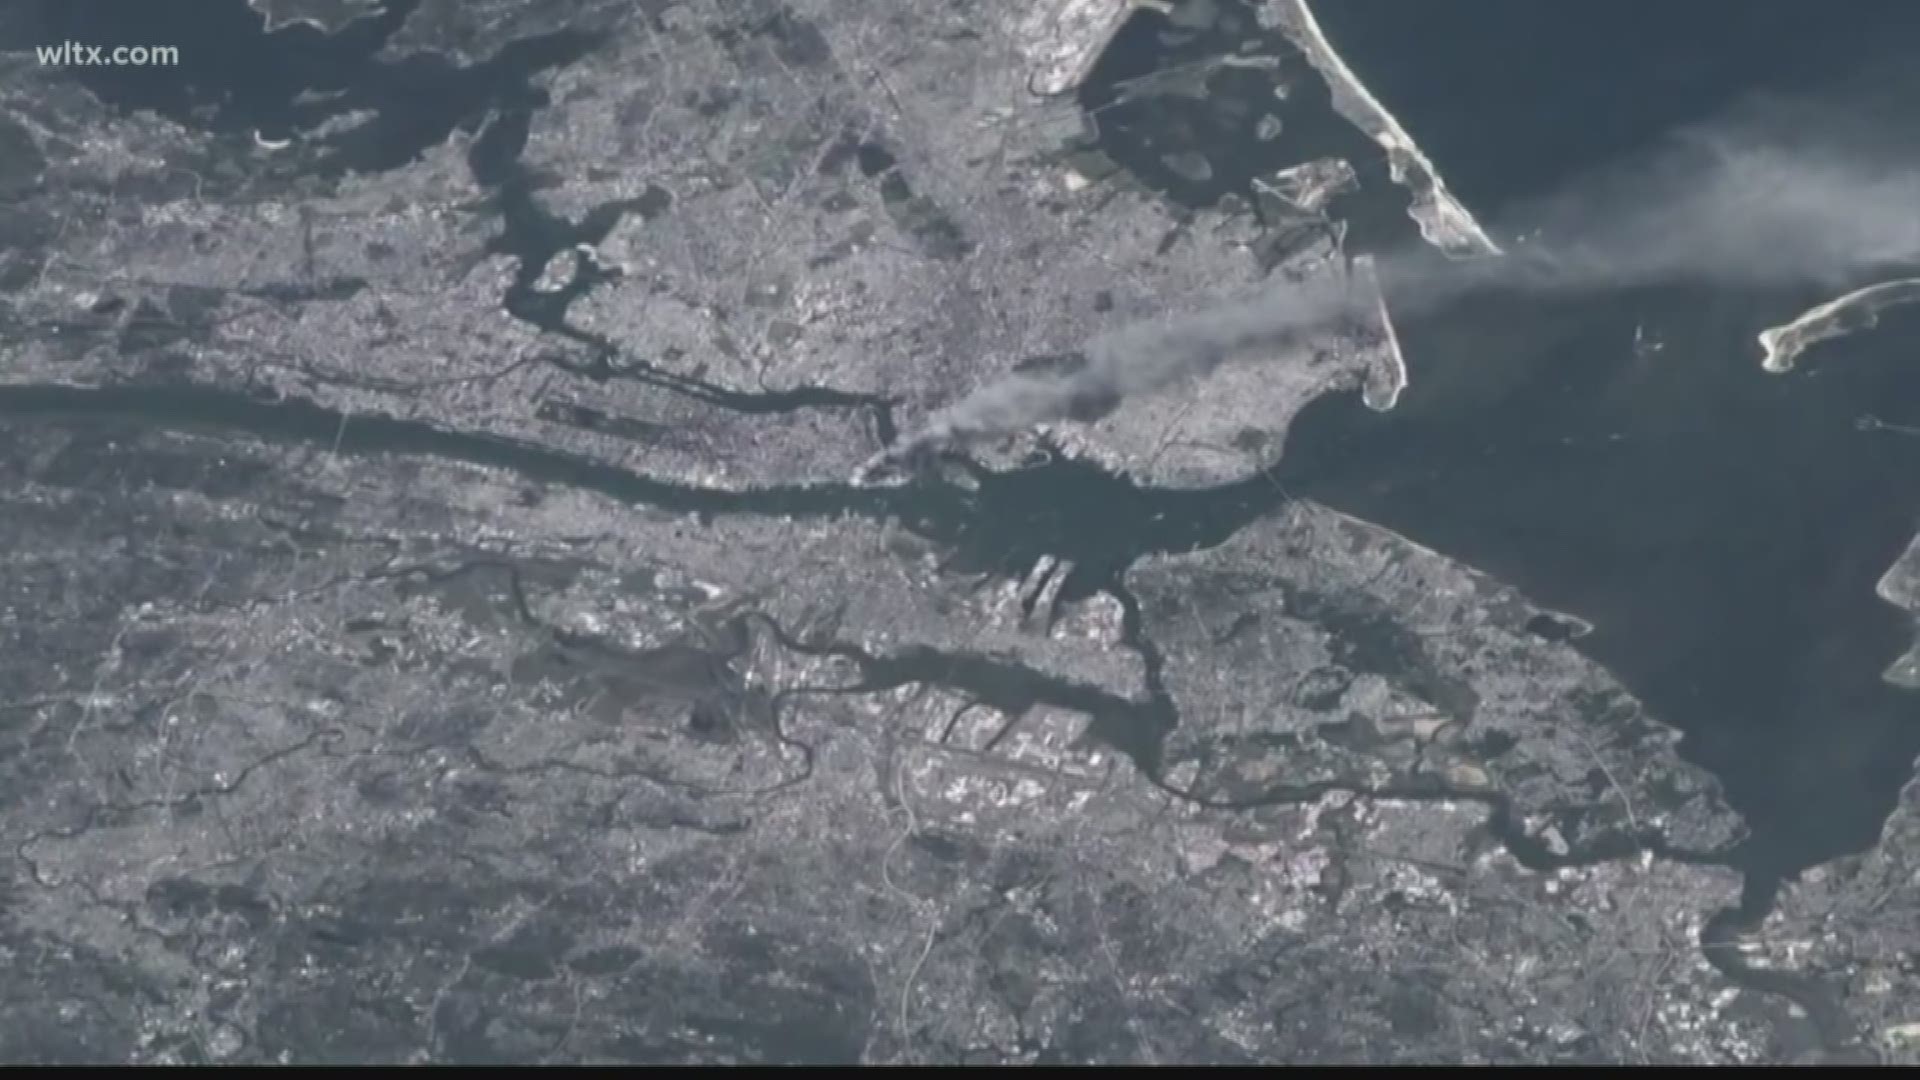 SC native Frank Culbertson watched the 9/11 terror attacks from the International Space Station